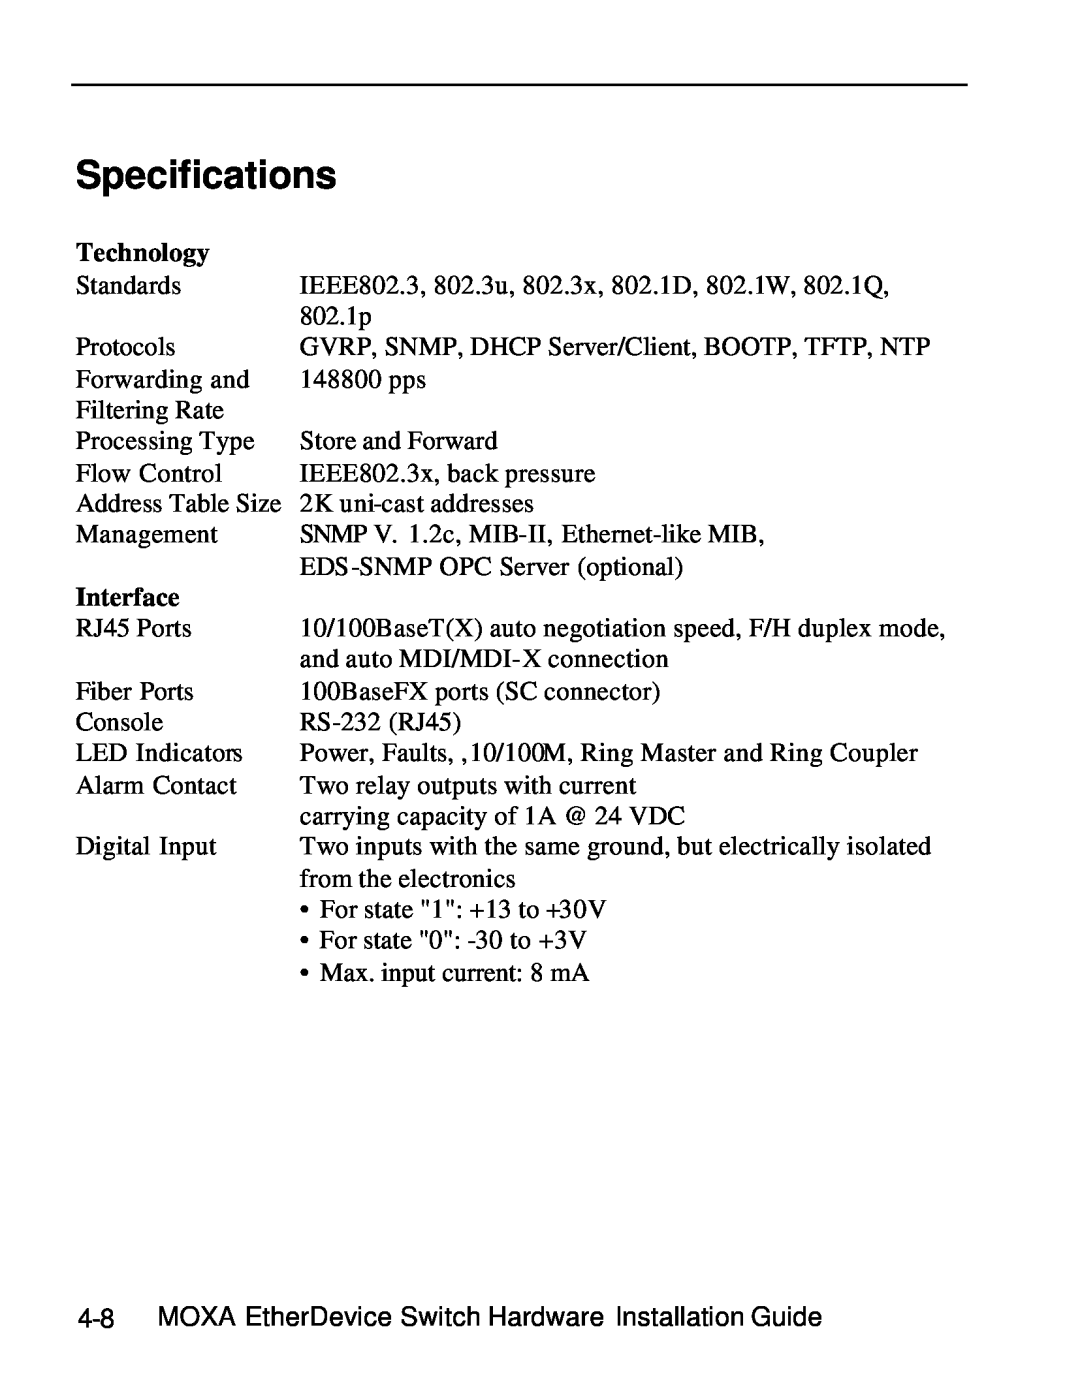 Moxa Technologies EDS-508 manual Specifications, Technology, Interface 